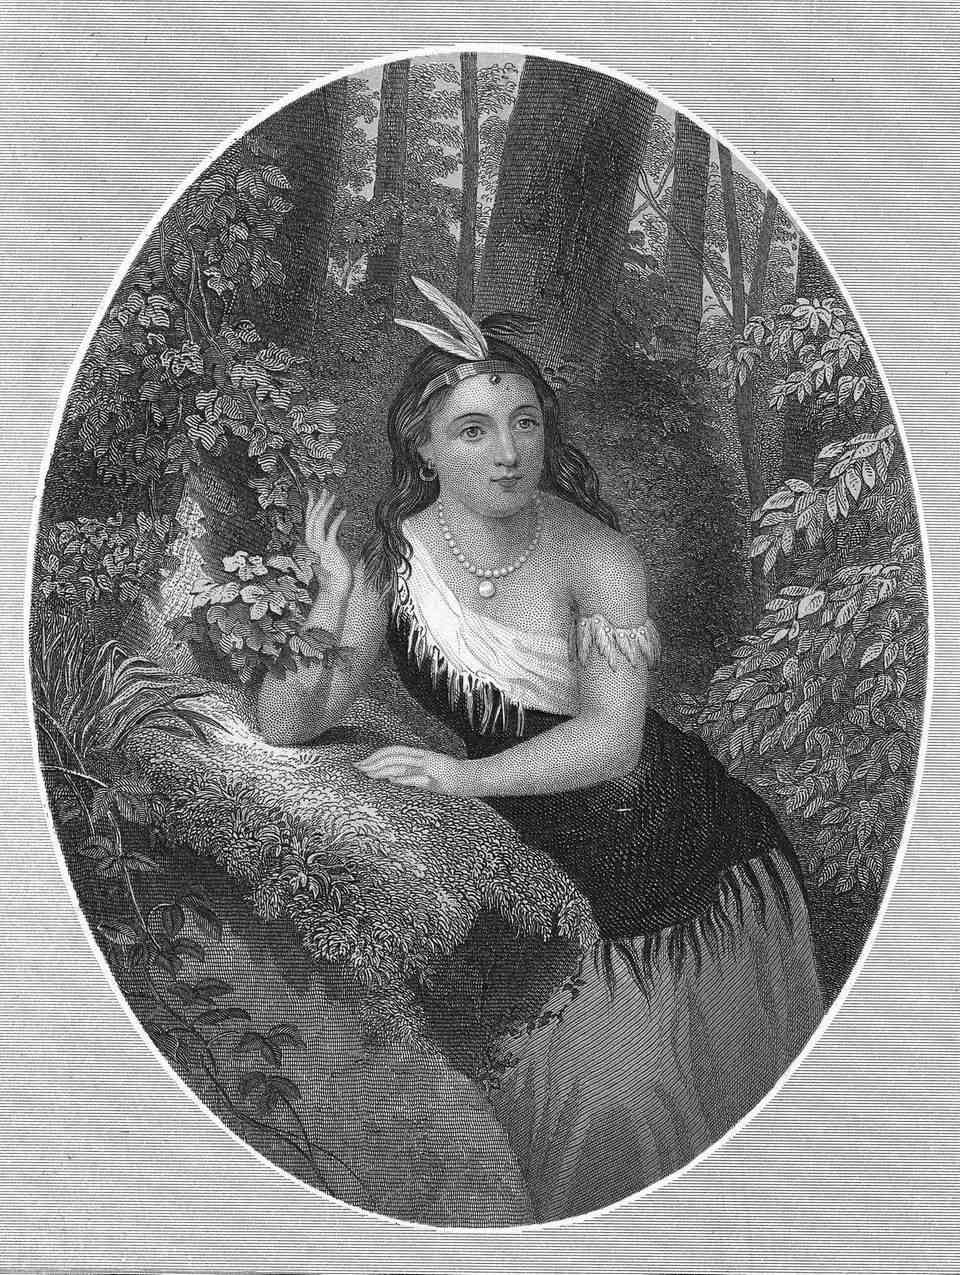 A portrait of the real Pocahontas.